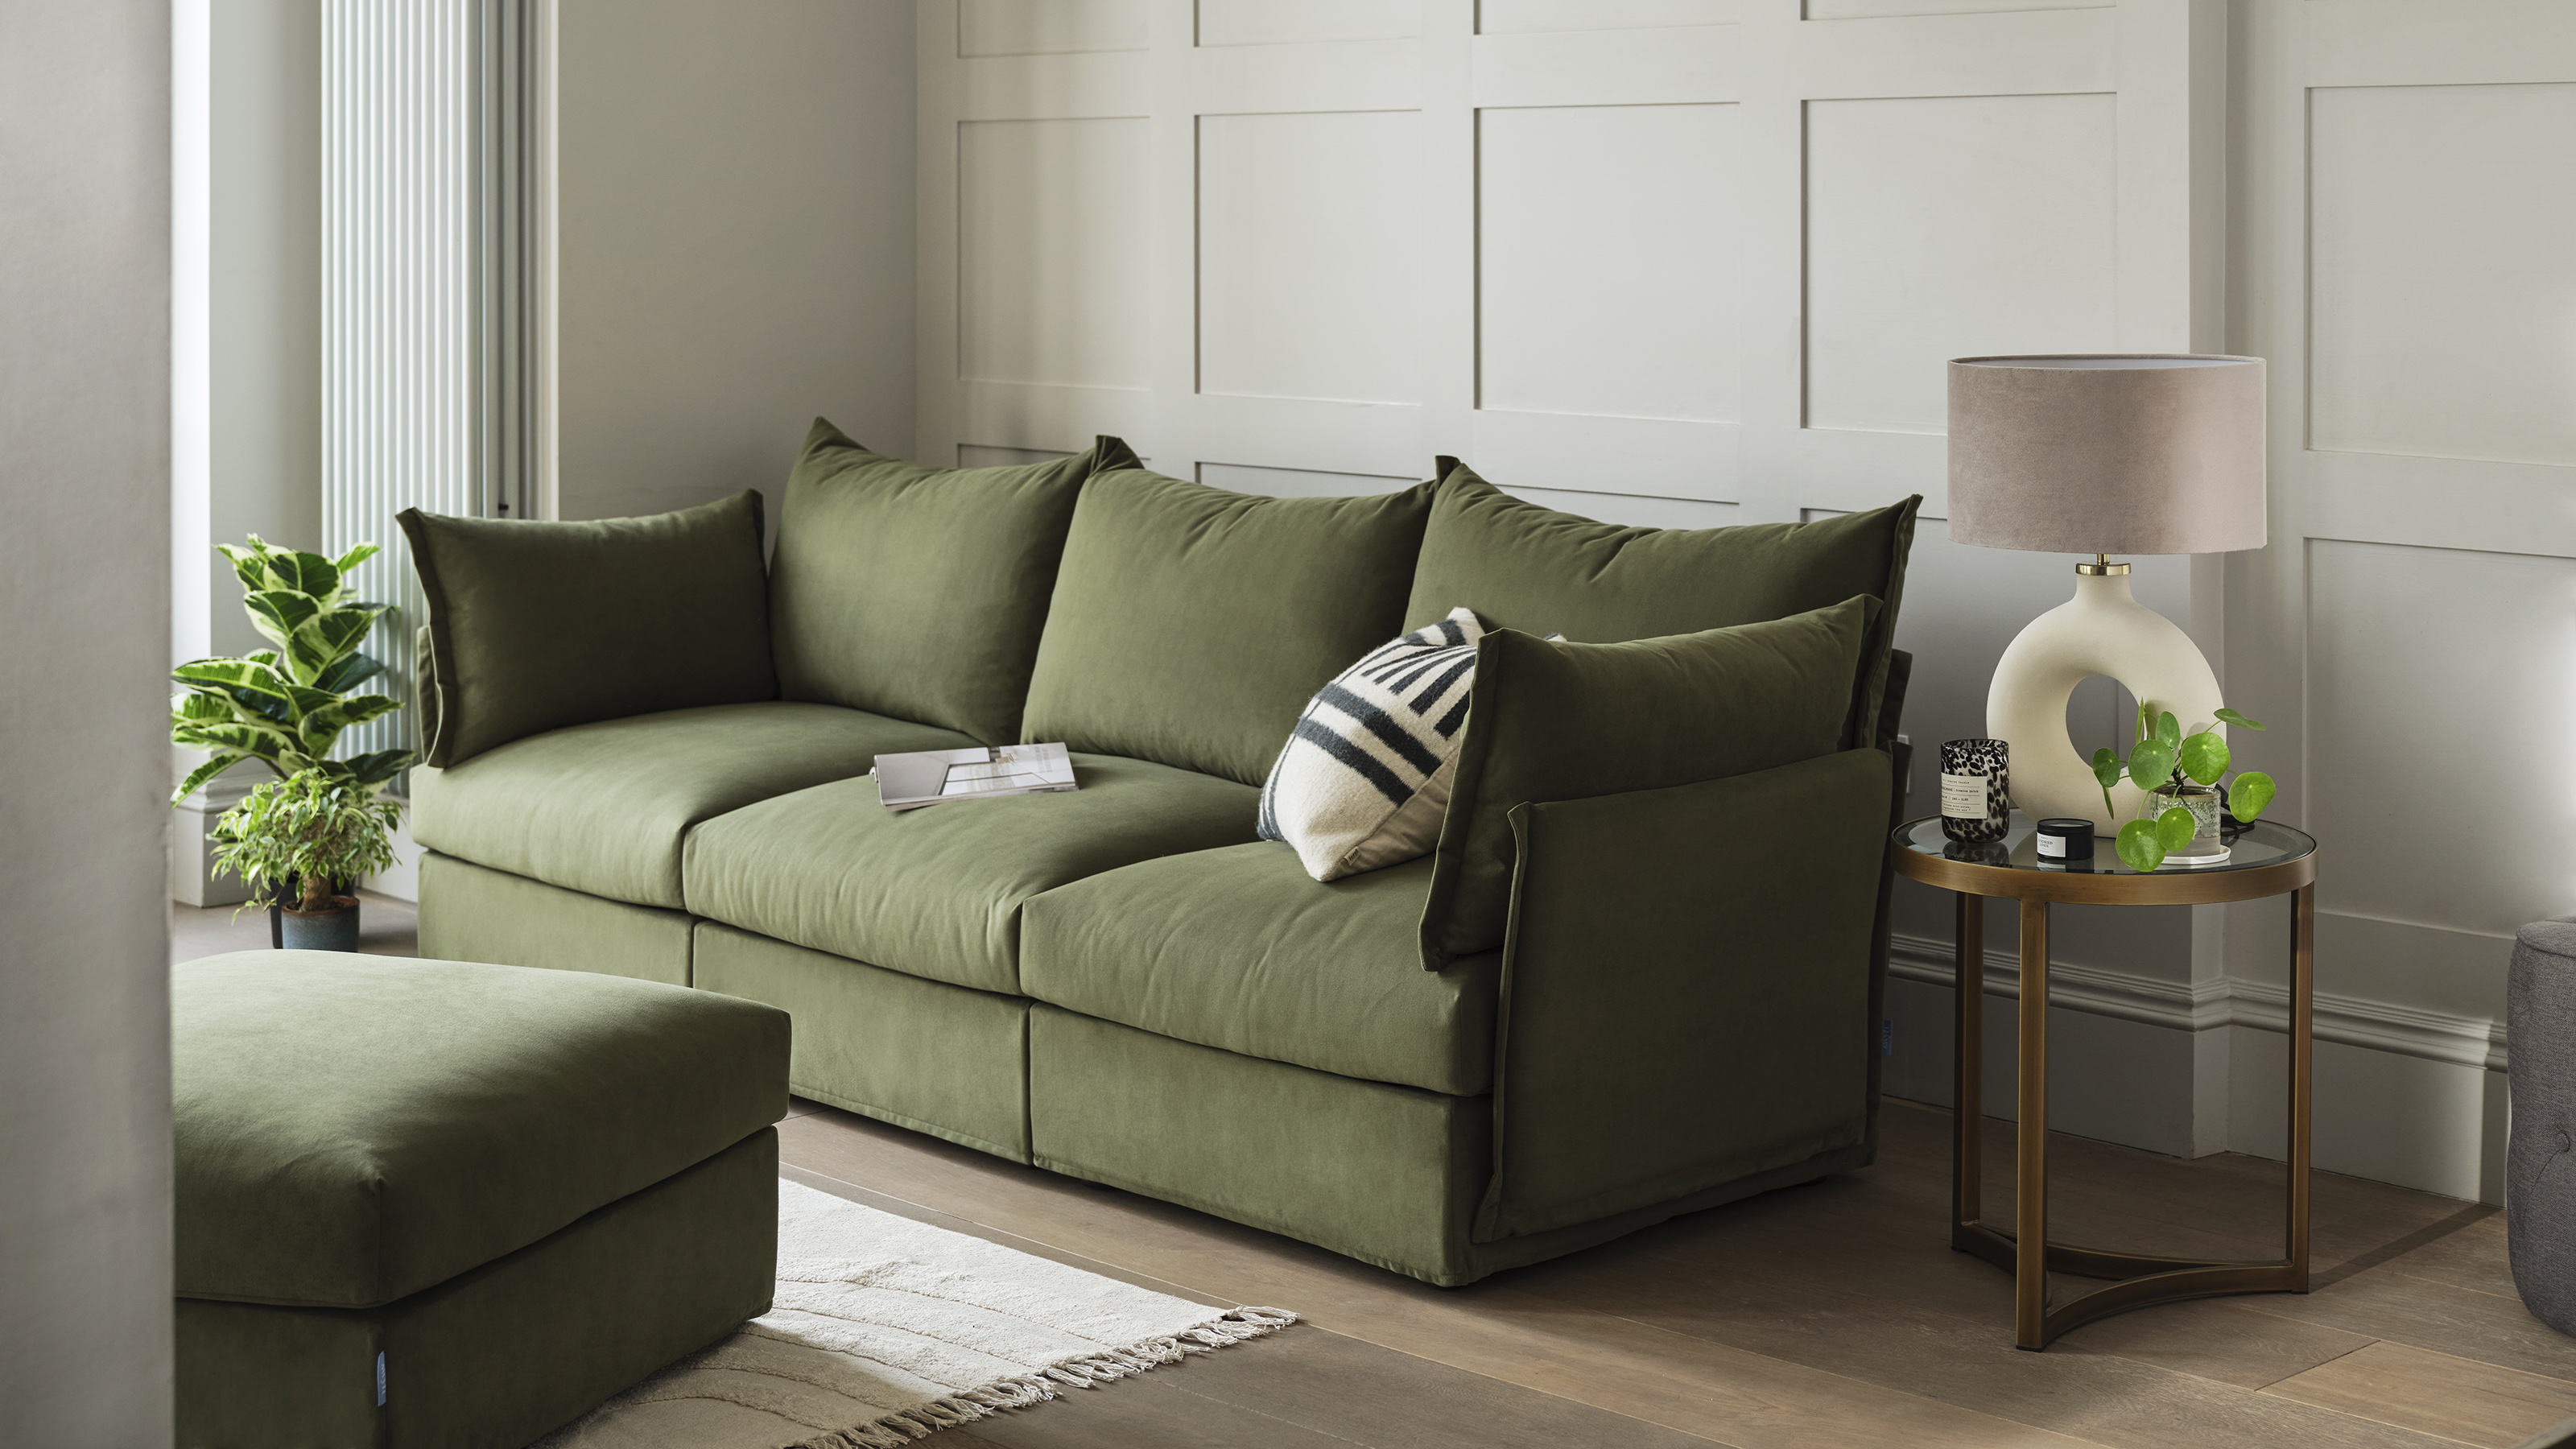 How to choose the best sofa upholstery fabric - Furl Blog